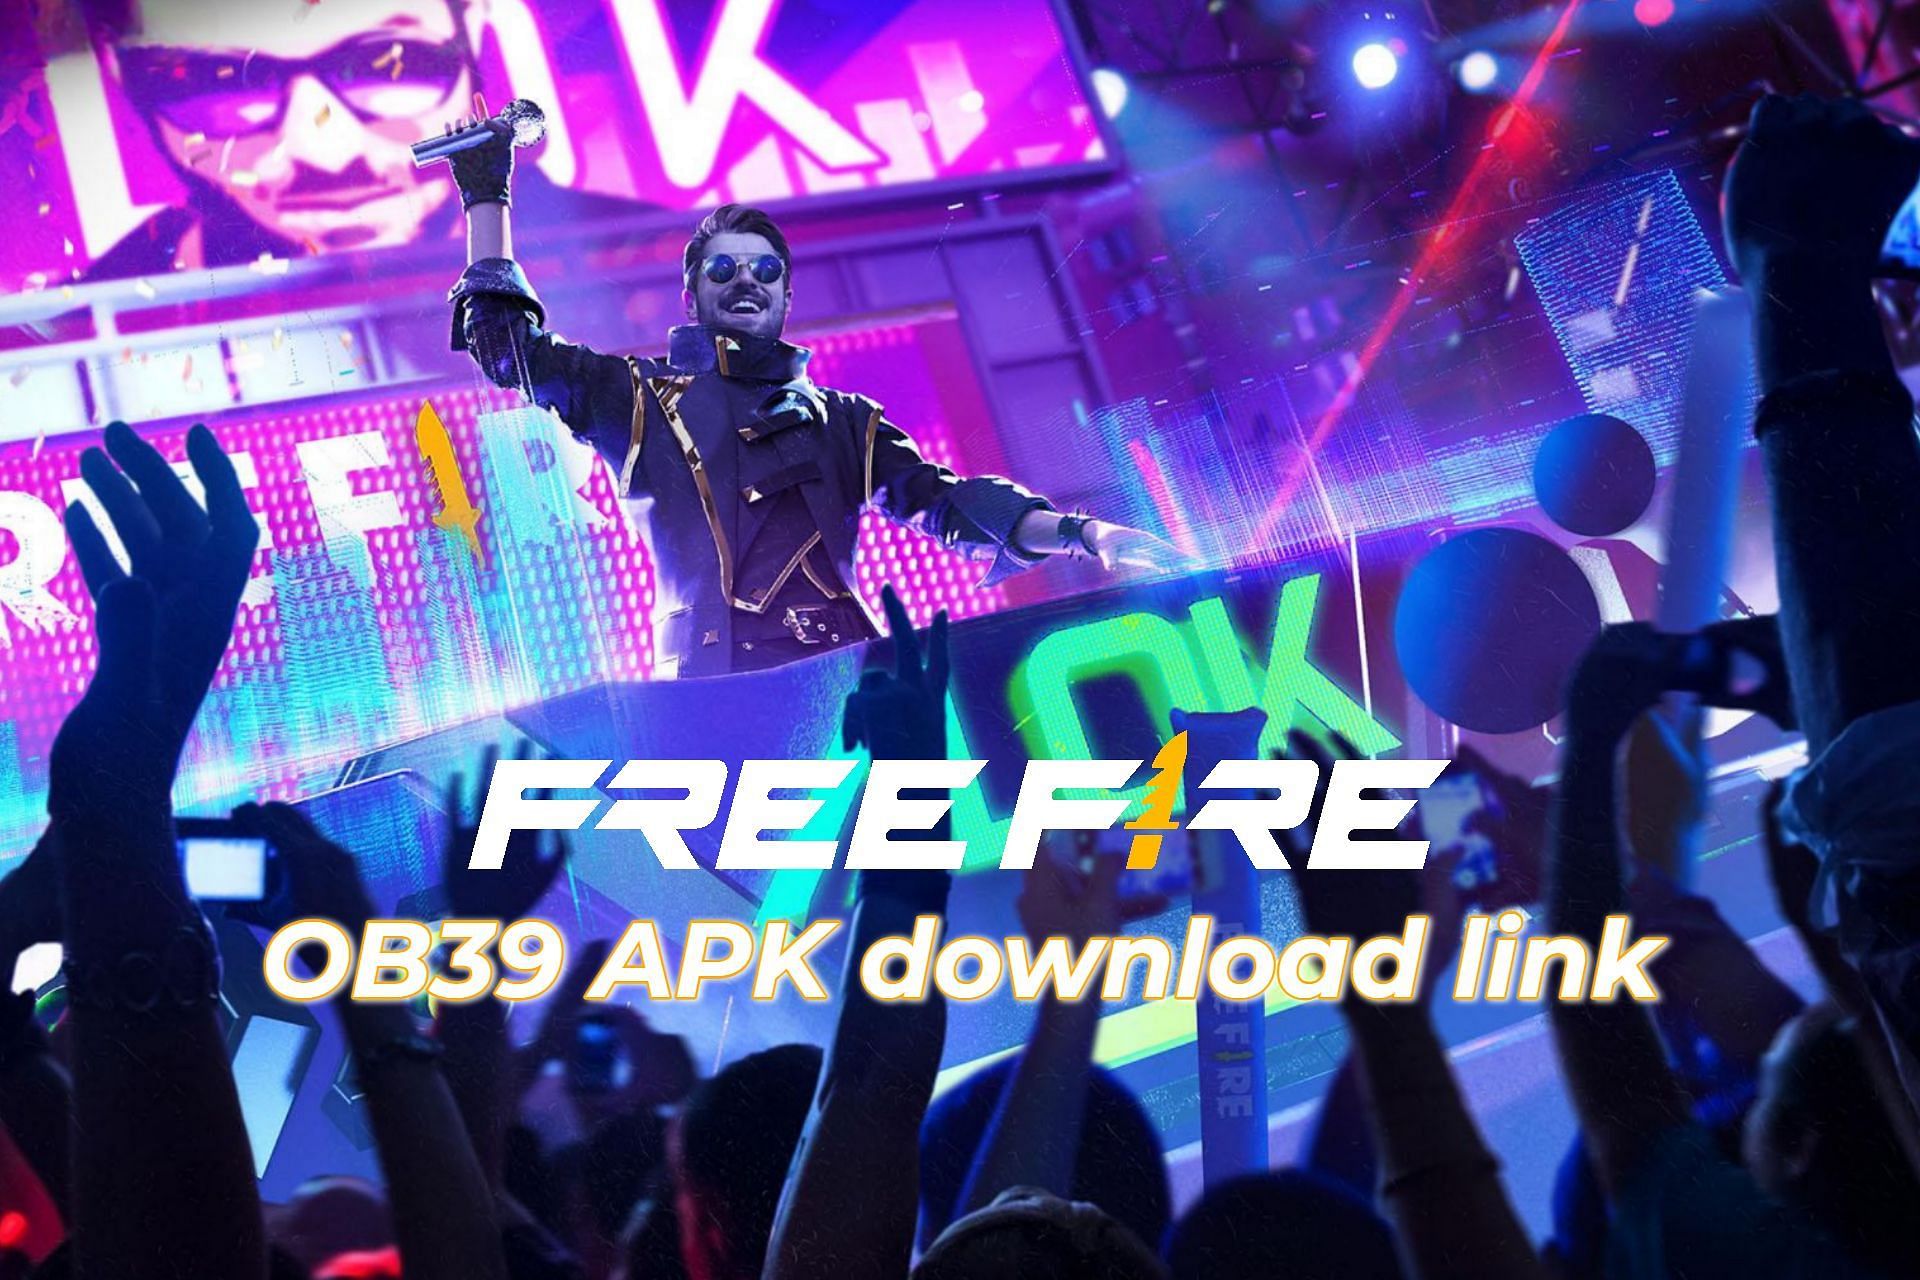 APK download link for Free Fire/Free Fire MAX OB39 update (Image via Sportskeeda)